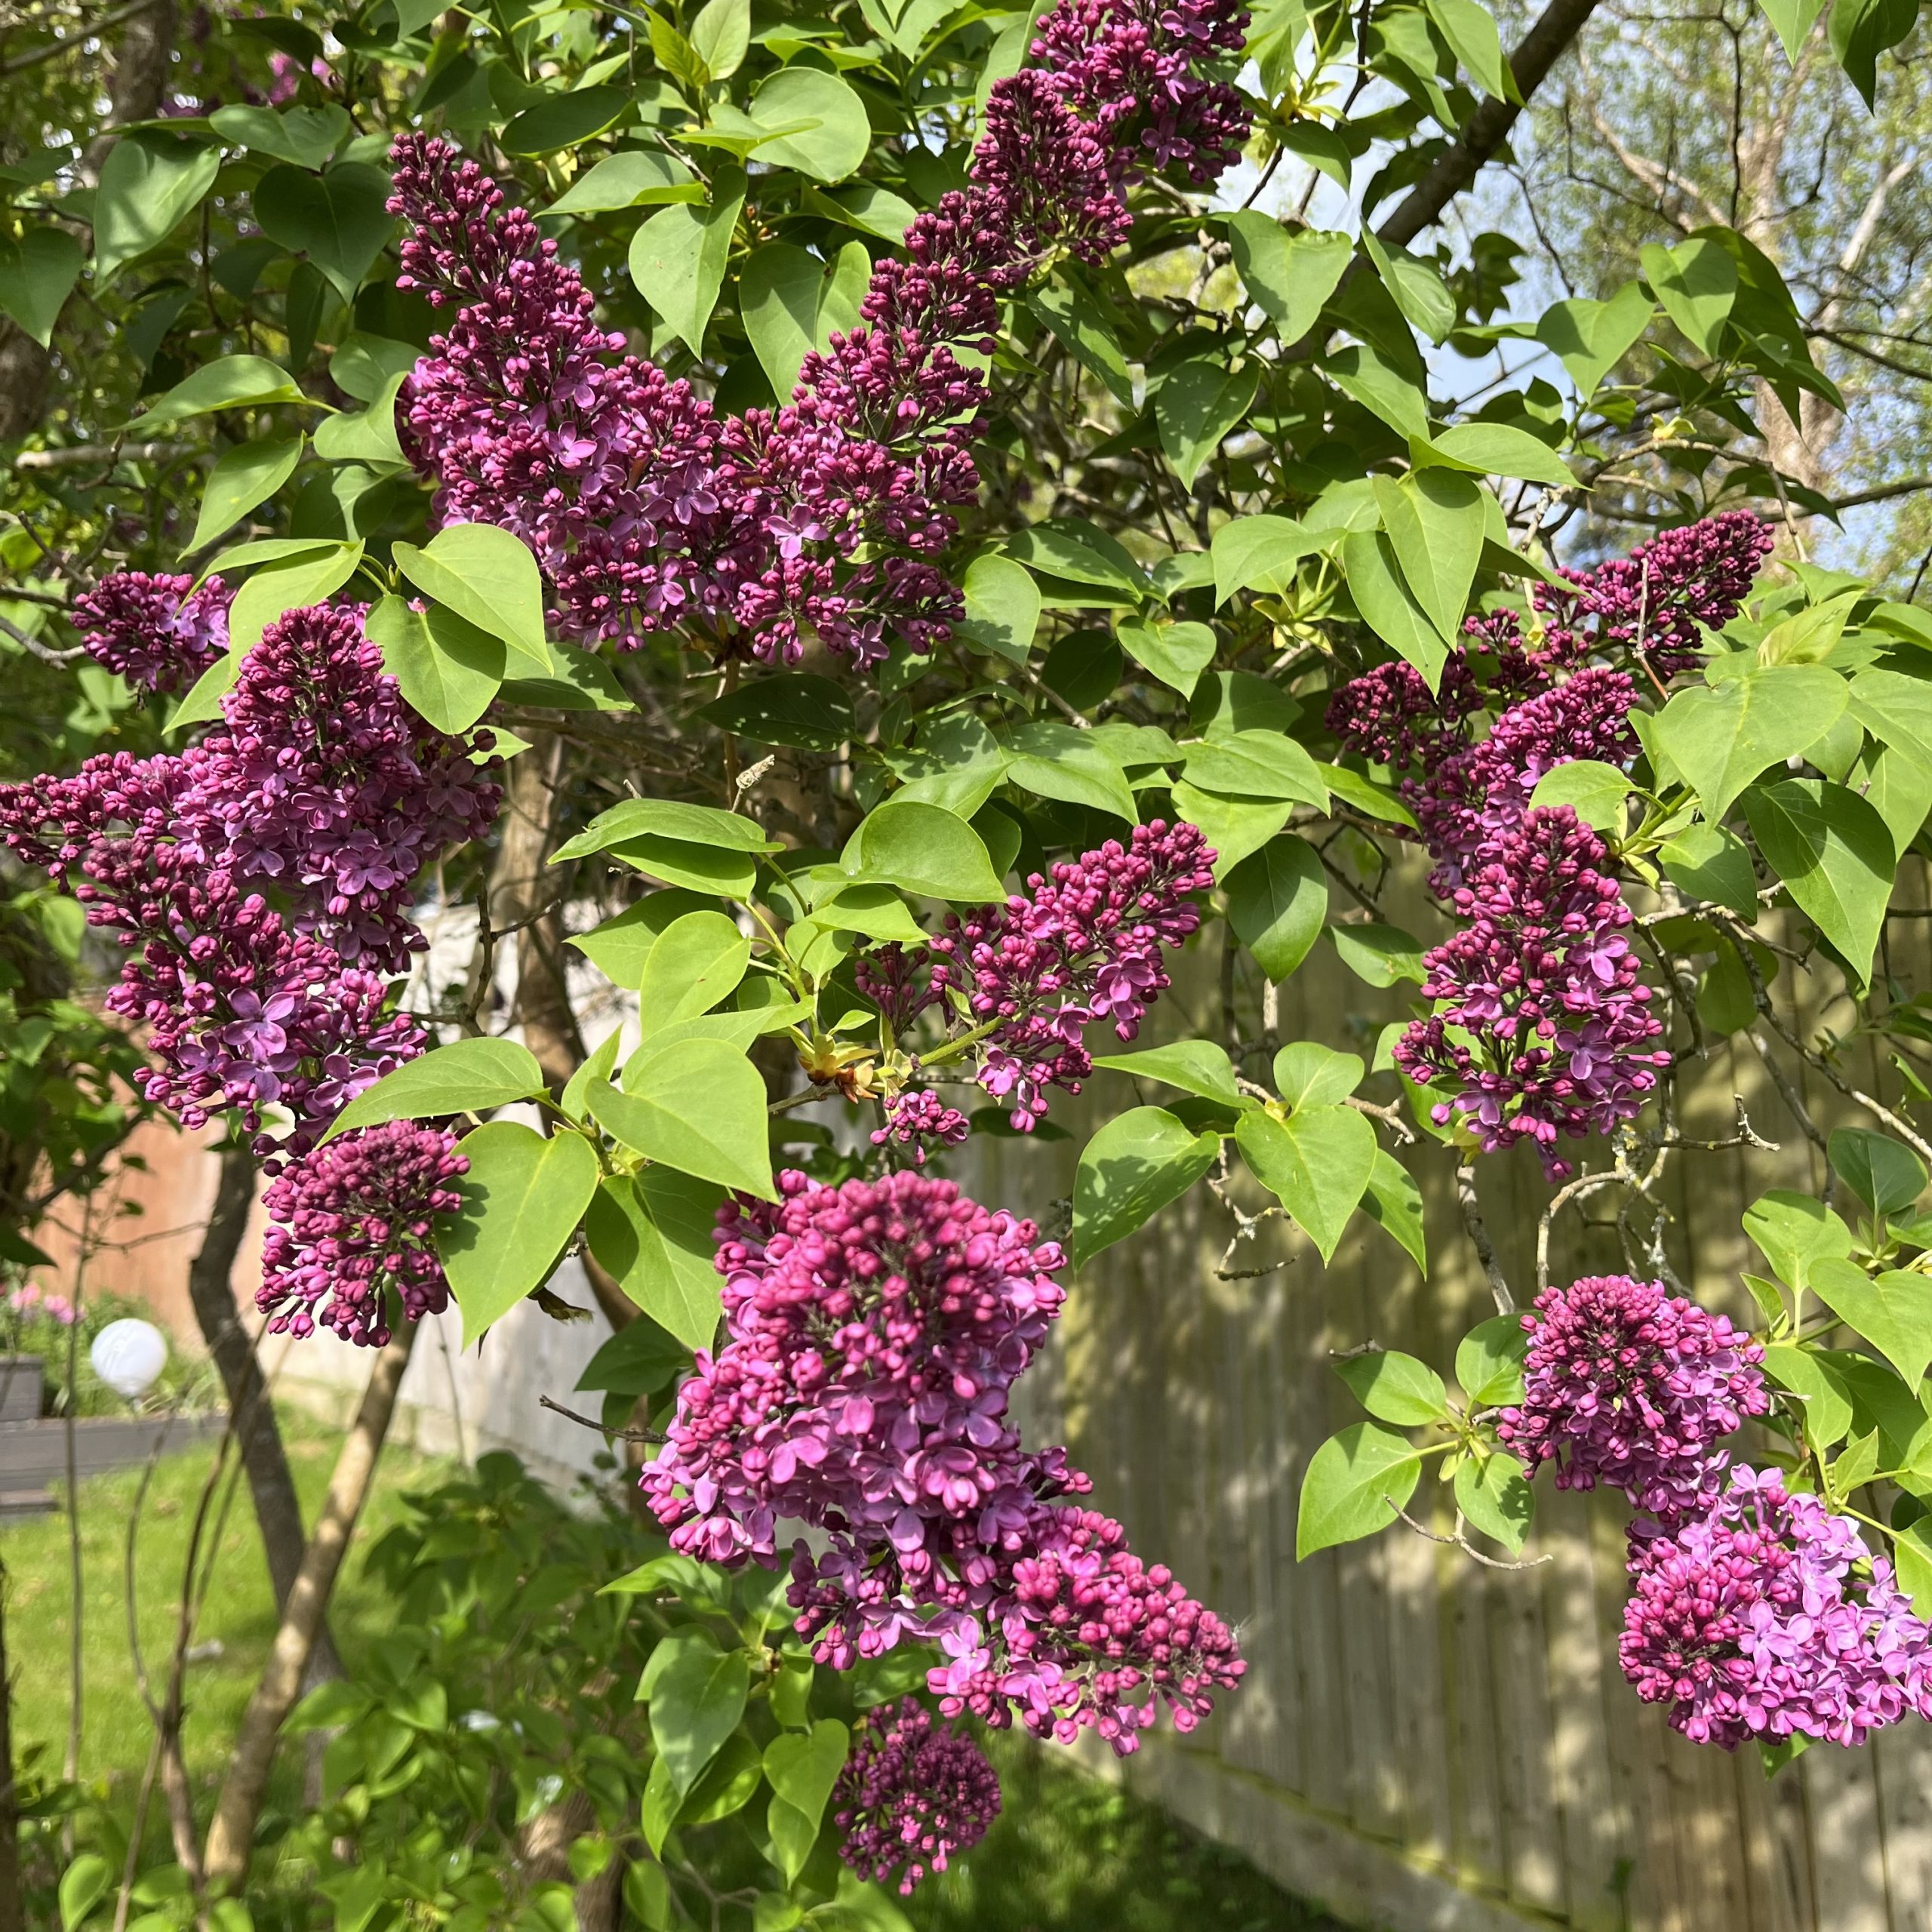 The lilac is coming out and it looks stunning.